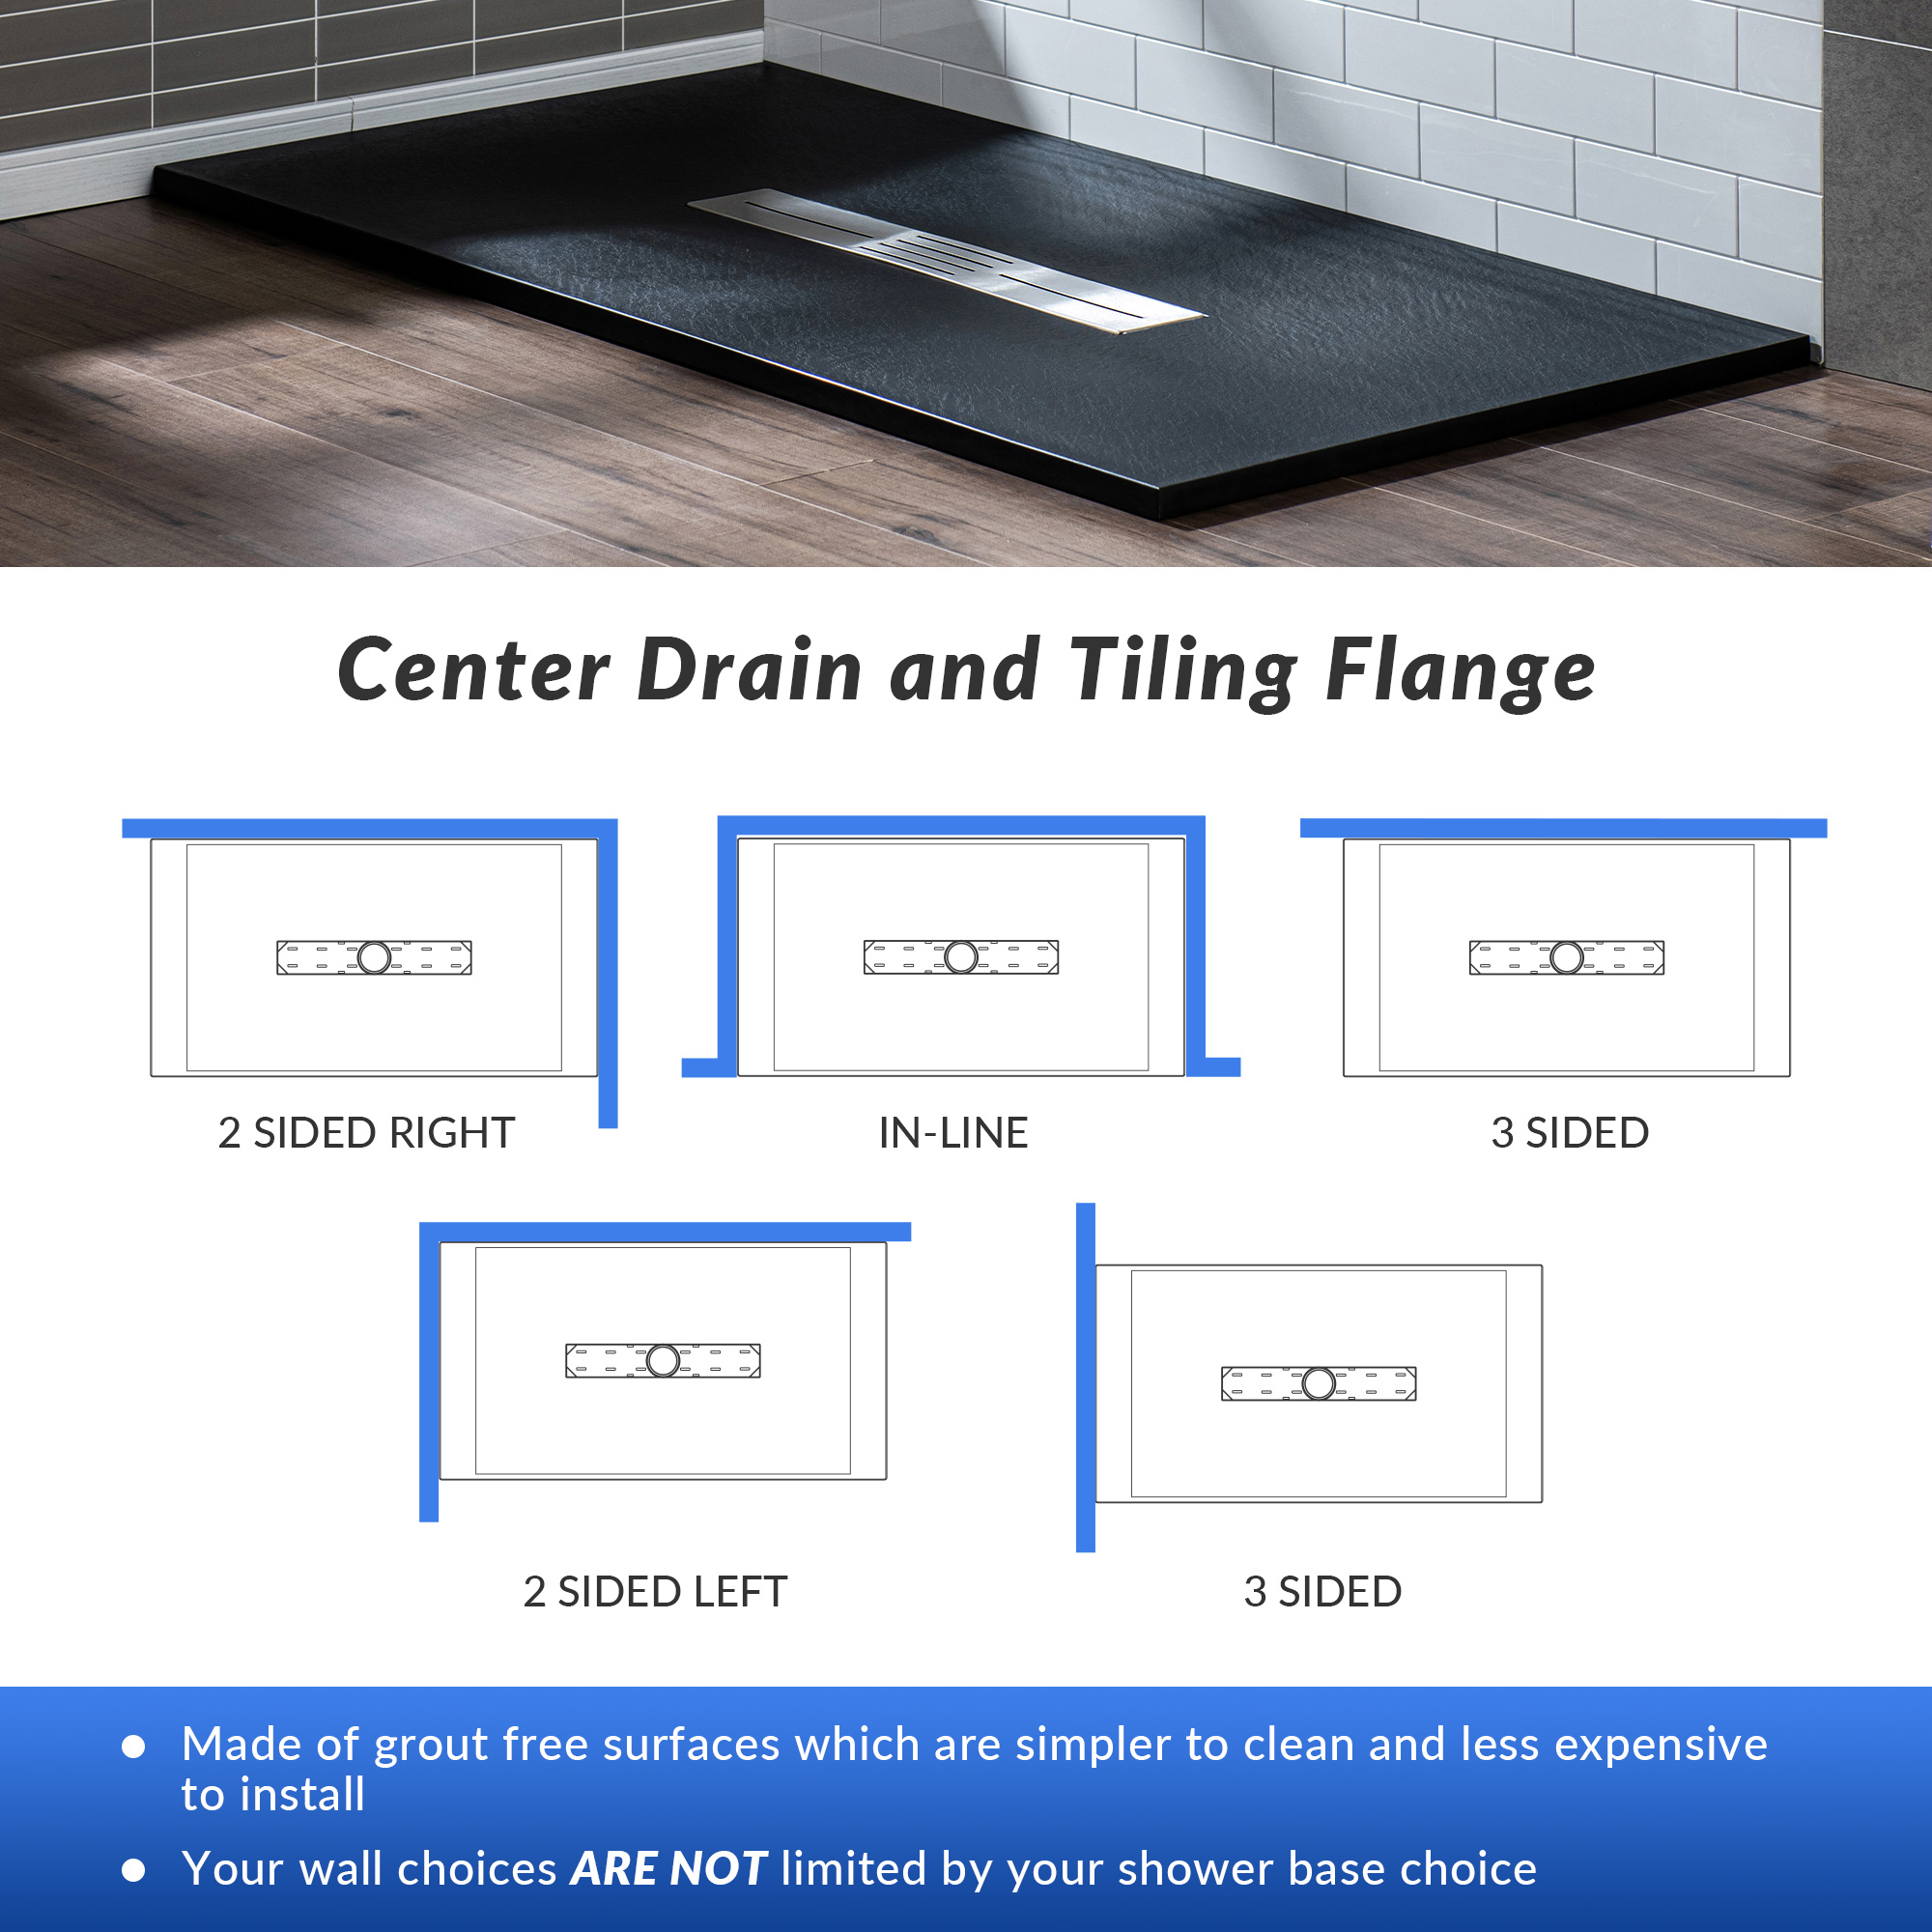  WOODBRIDGE 48-in L x 36-in W Zero Threshold End Drain Shower Base with Center Drain Placement, Matching Decorative Drain Plate and Tile Flange, Wheel Chair Access, Low Profile, Black_15114